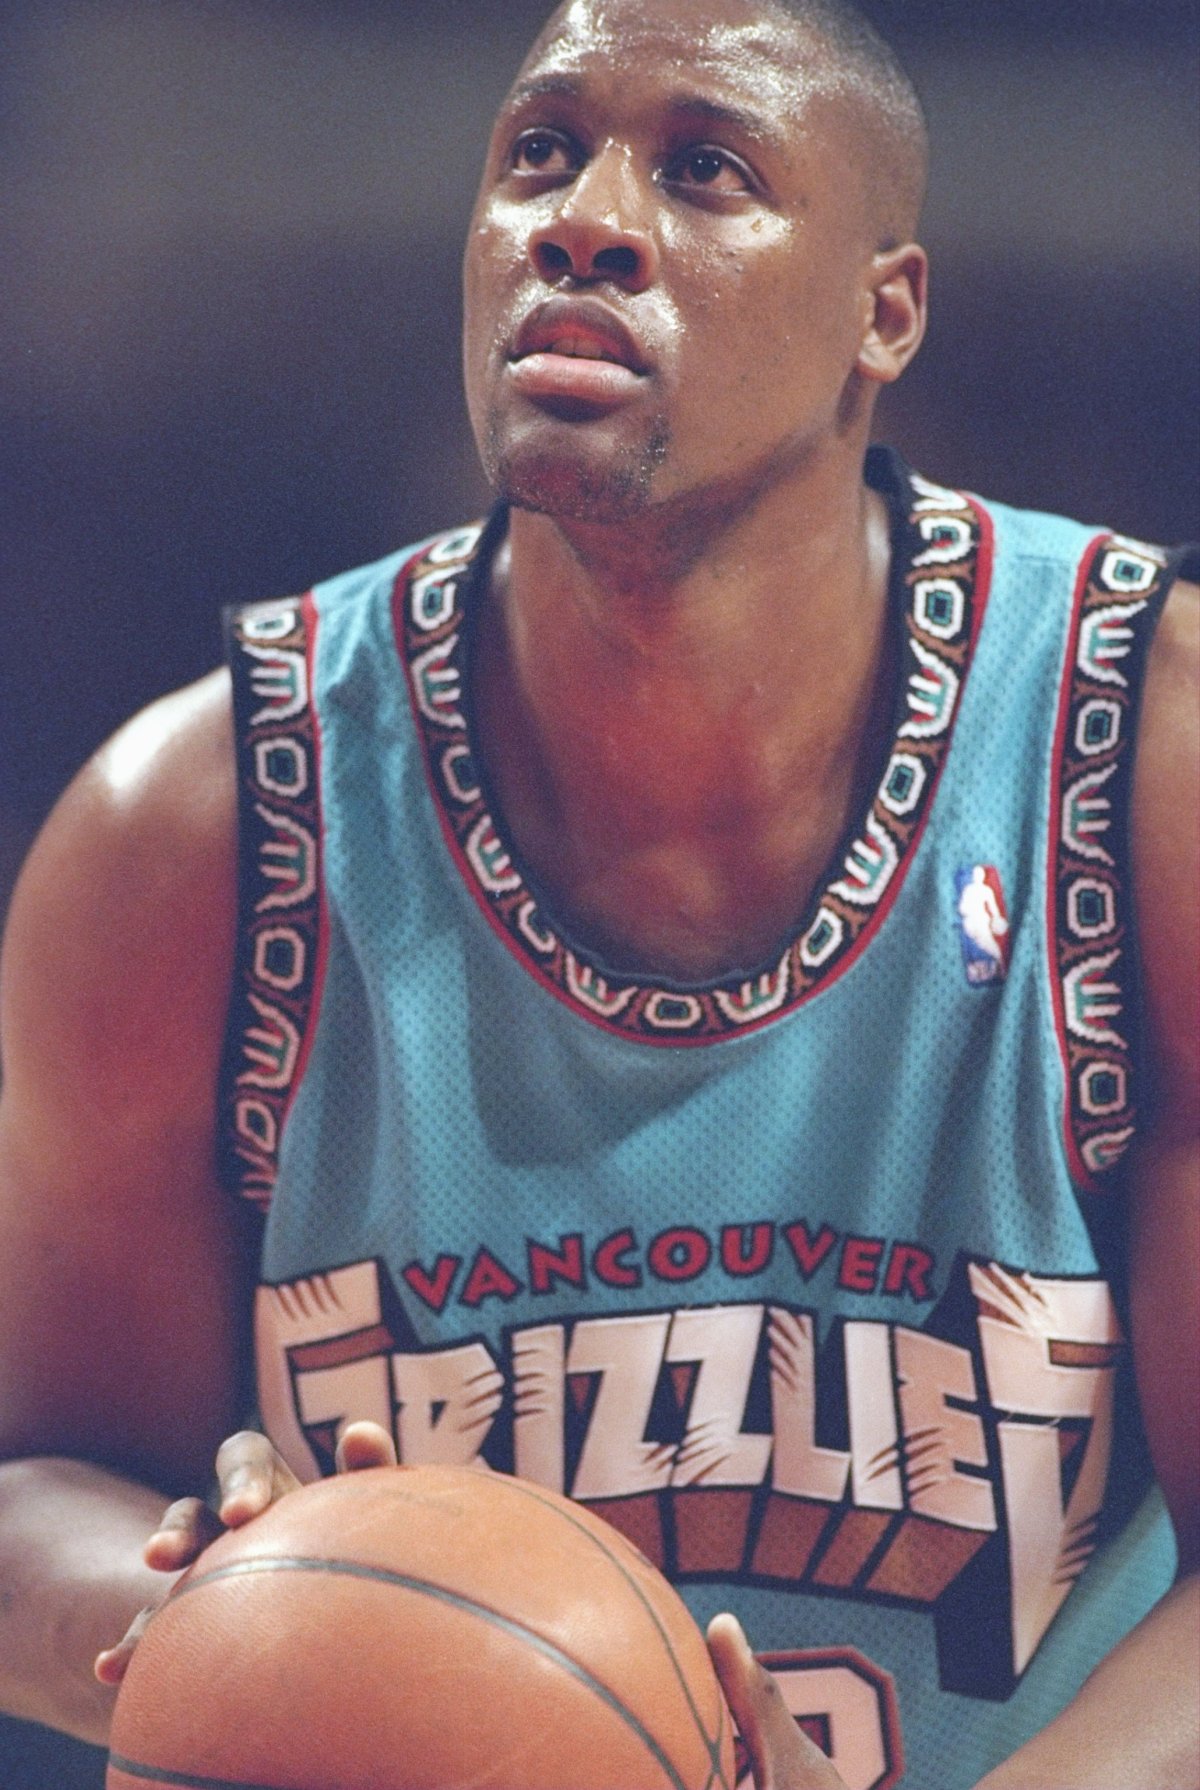 Who Killed the Vancouver Grizzlies?